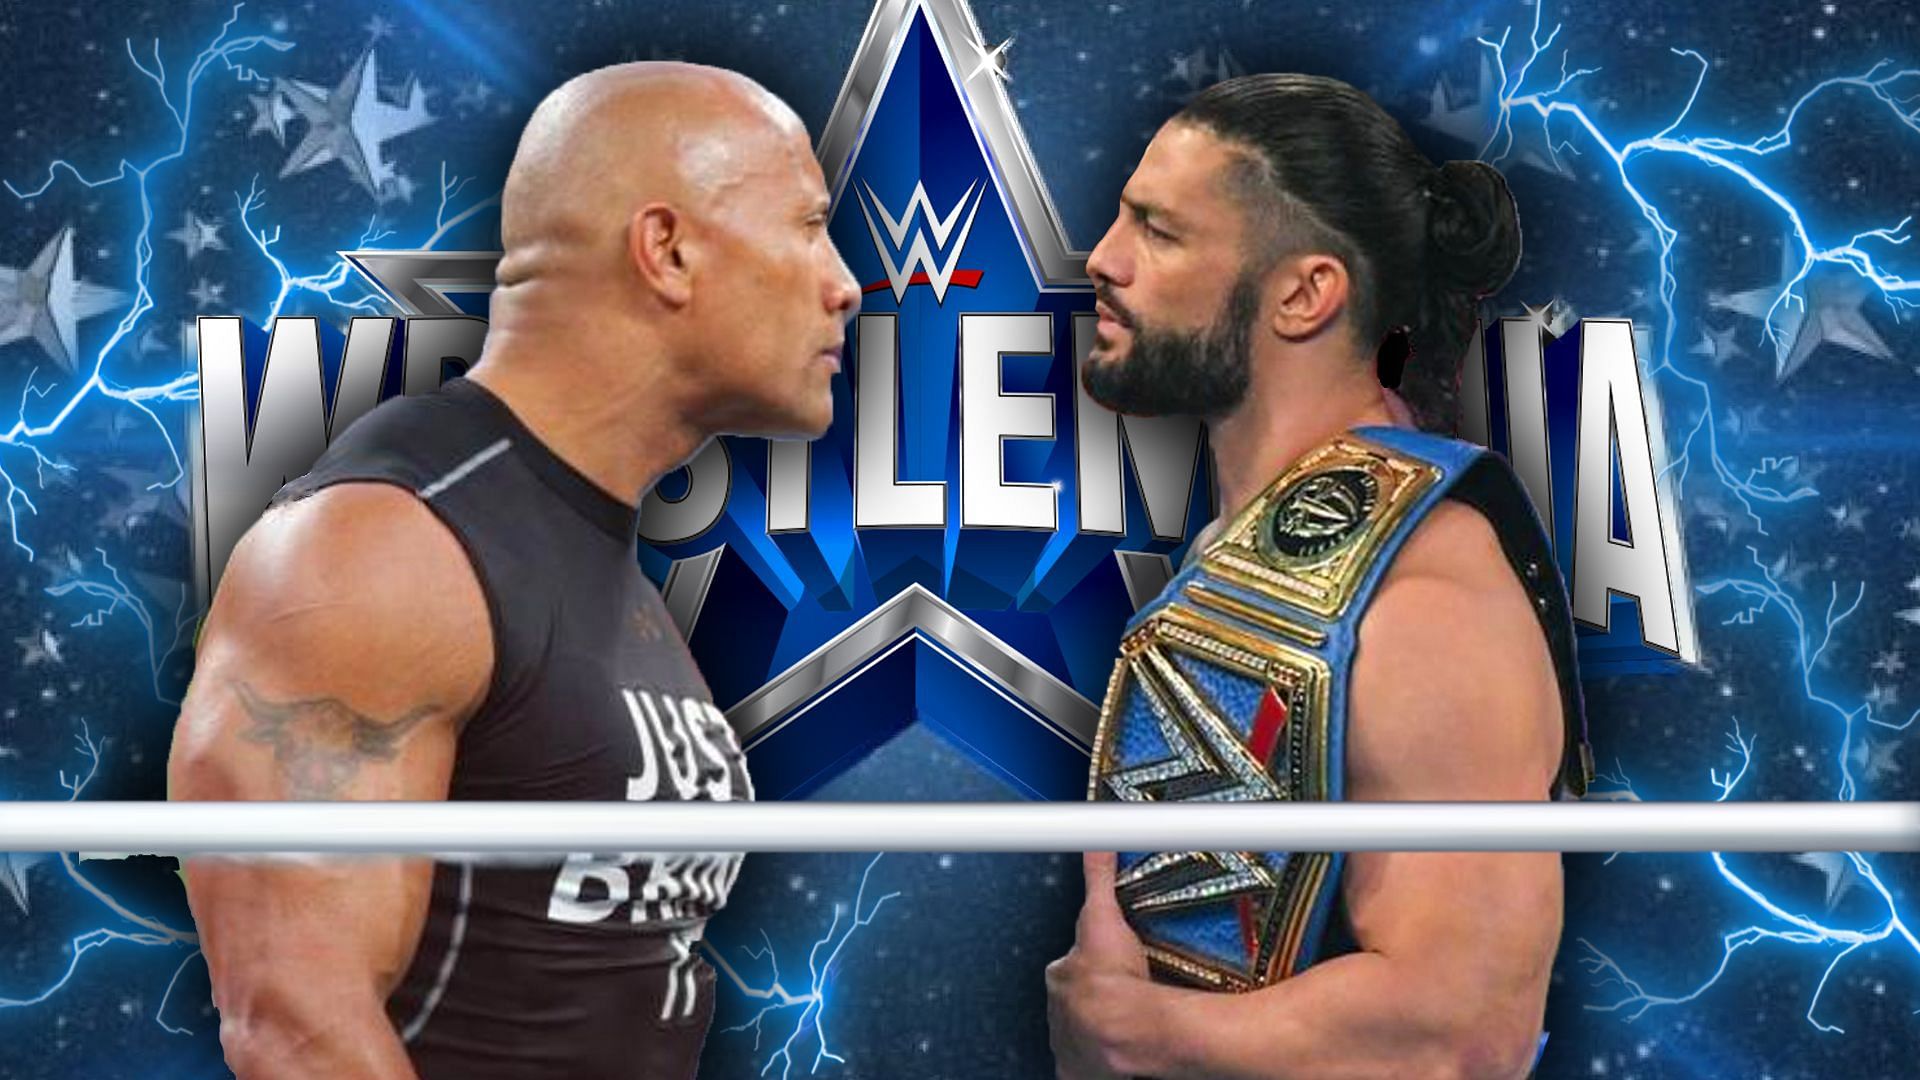 Could we witness this dream confrontation at WrestleMania Sunday?